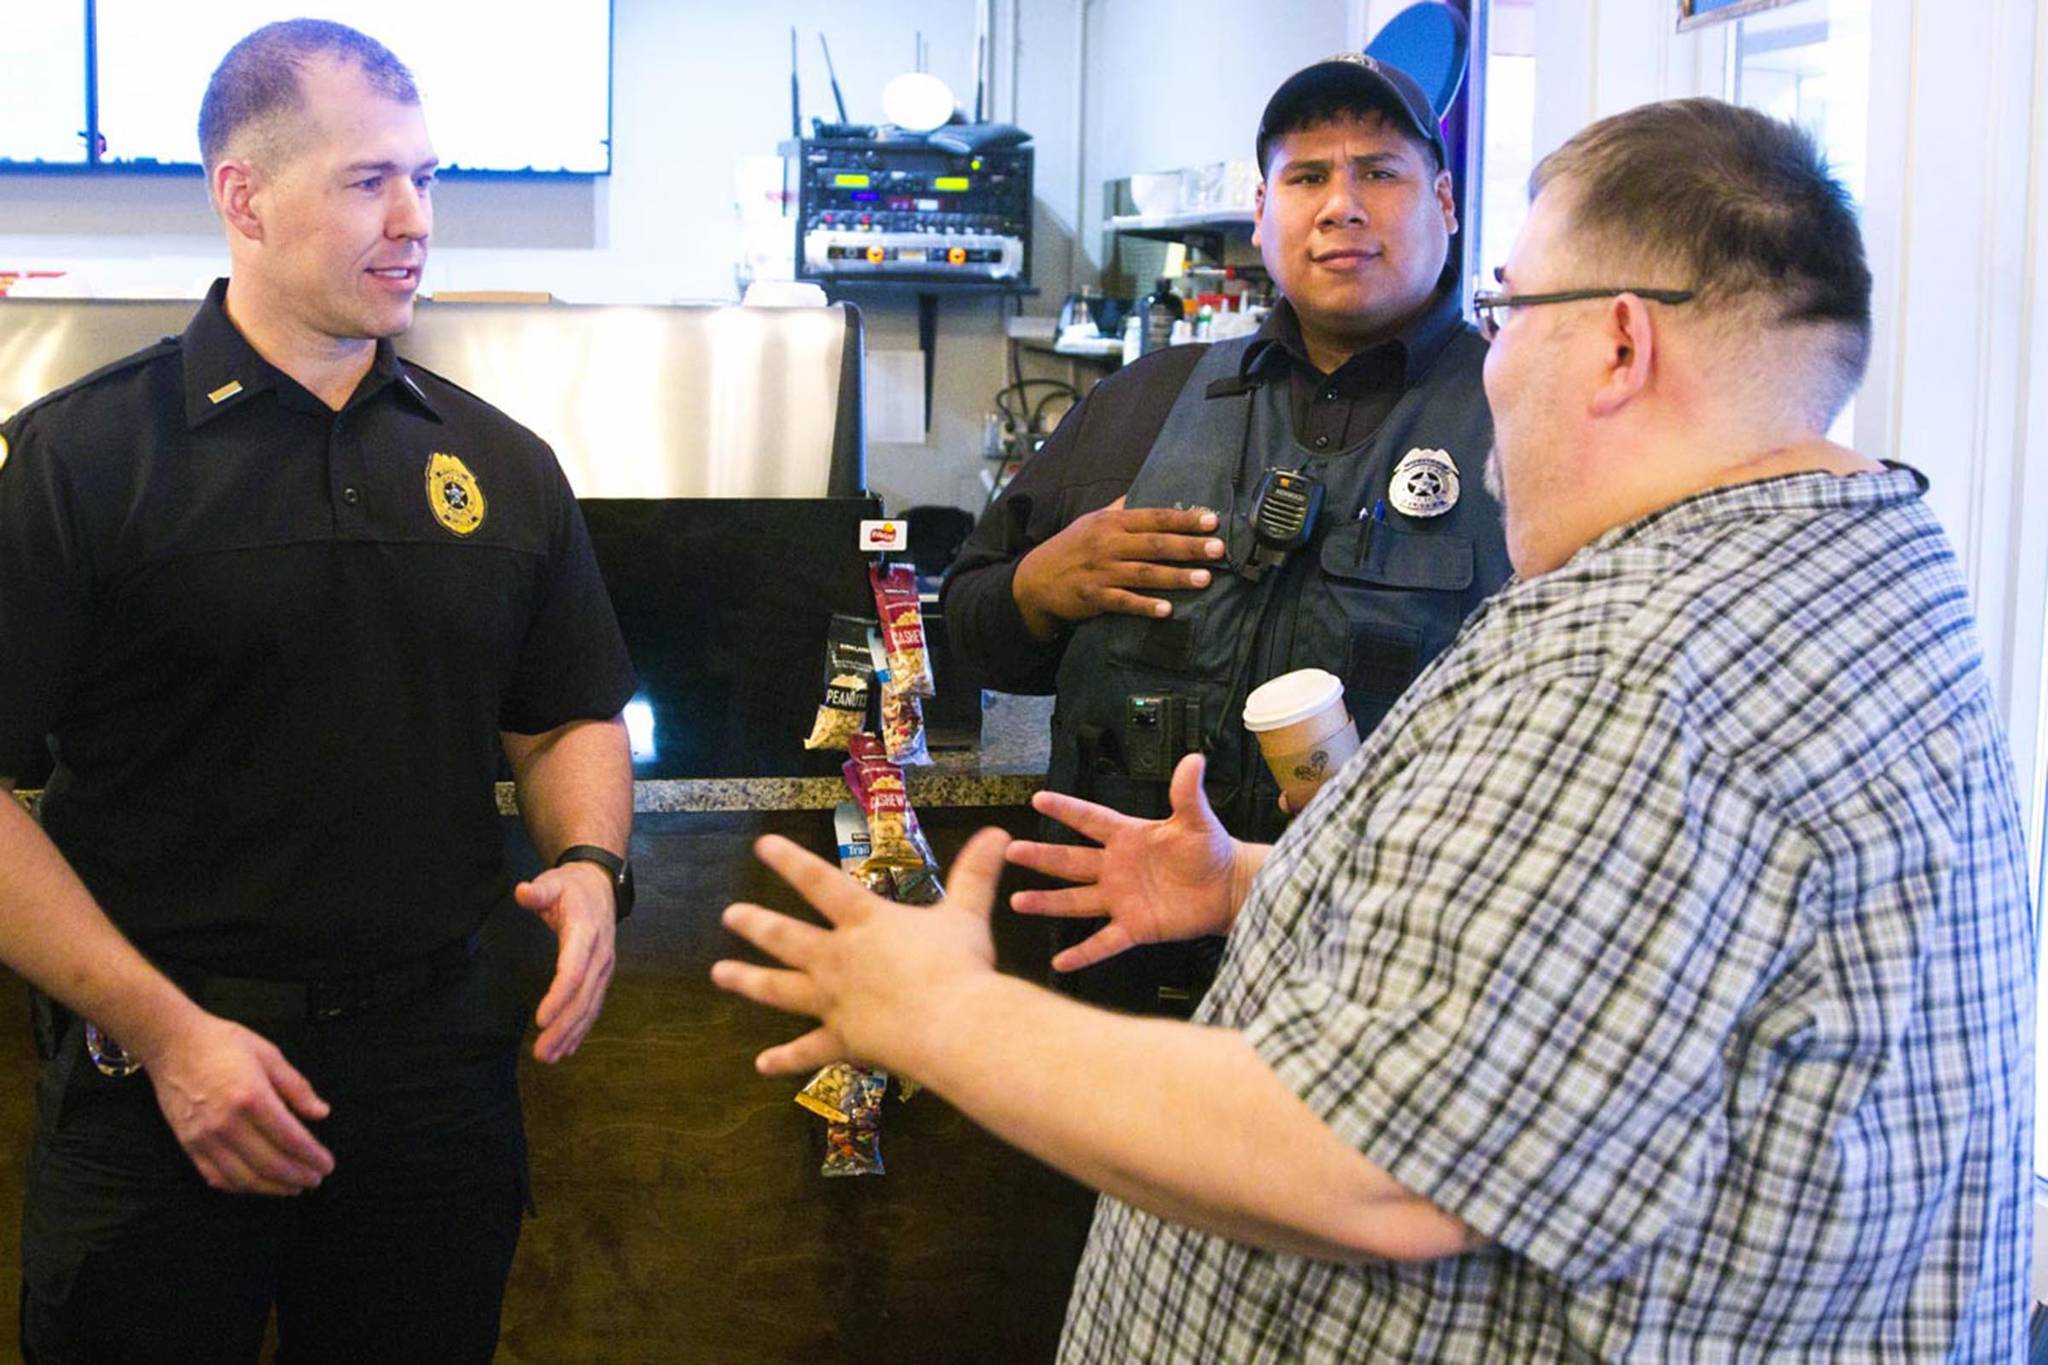 Lt. Krag Campbell with the Juneau Police Department talks with Richard Peterson, president of the Central Council of Tlingit and Haida Indian Tribes of Alaska, during Coffee with a Cop at Sacred Grounds on Oct. 2, 2019. (Michael S. Lockett | Juneau Empire)